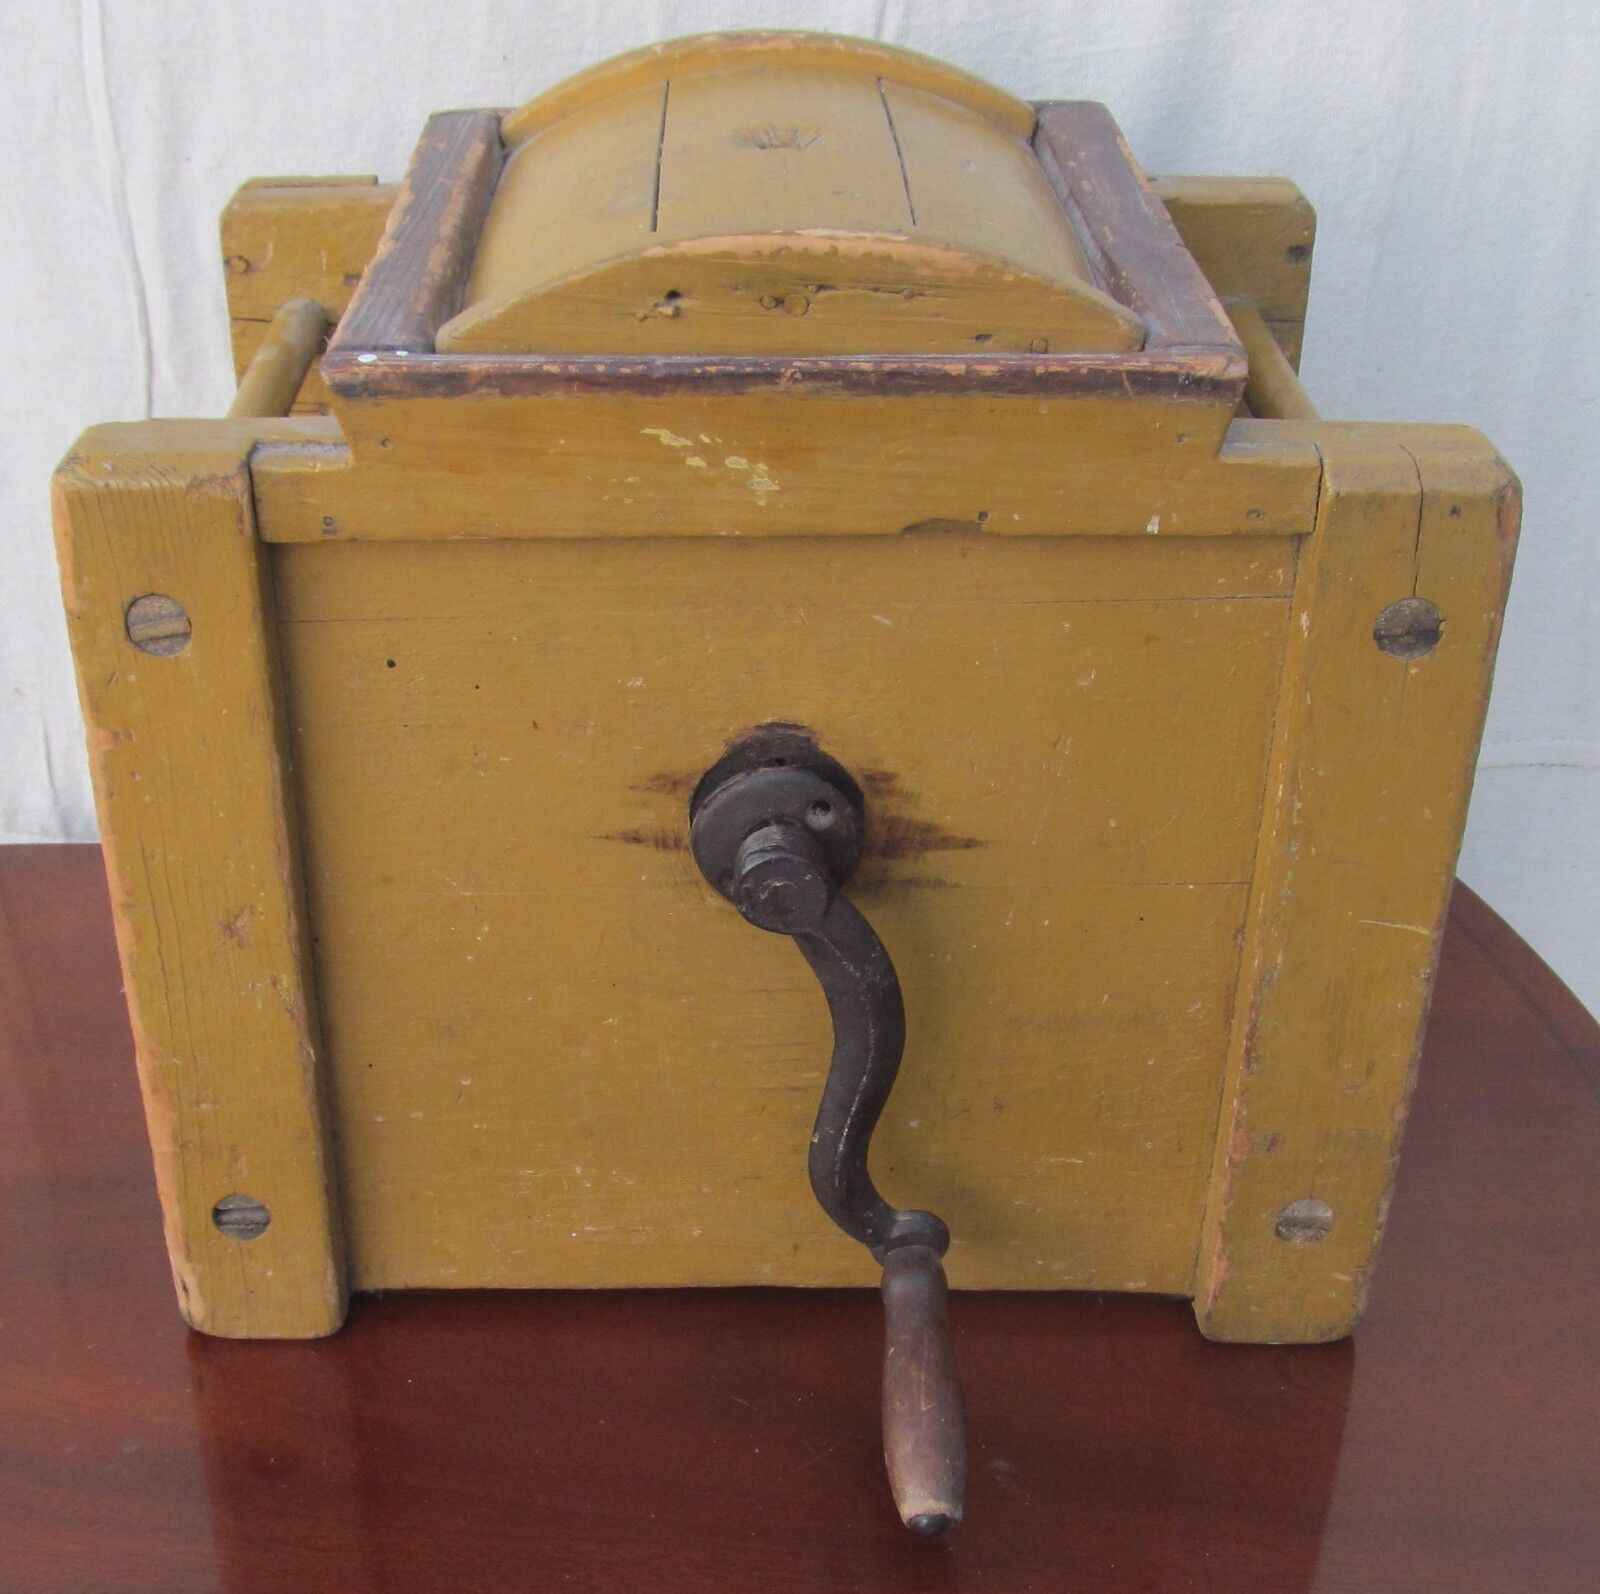 EXCELLENT 19TH CENTURY PRIMITIVE BUTTER CHURN IN ORIGINAL MUSTARD YELLOW PAINT